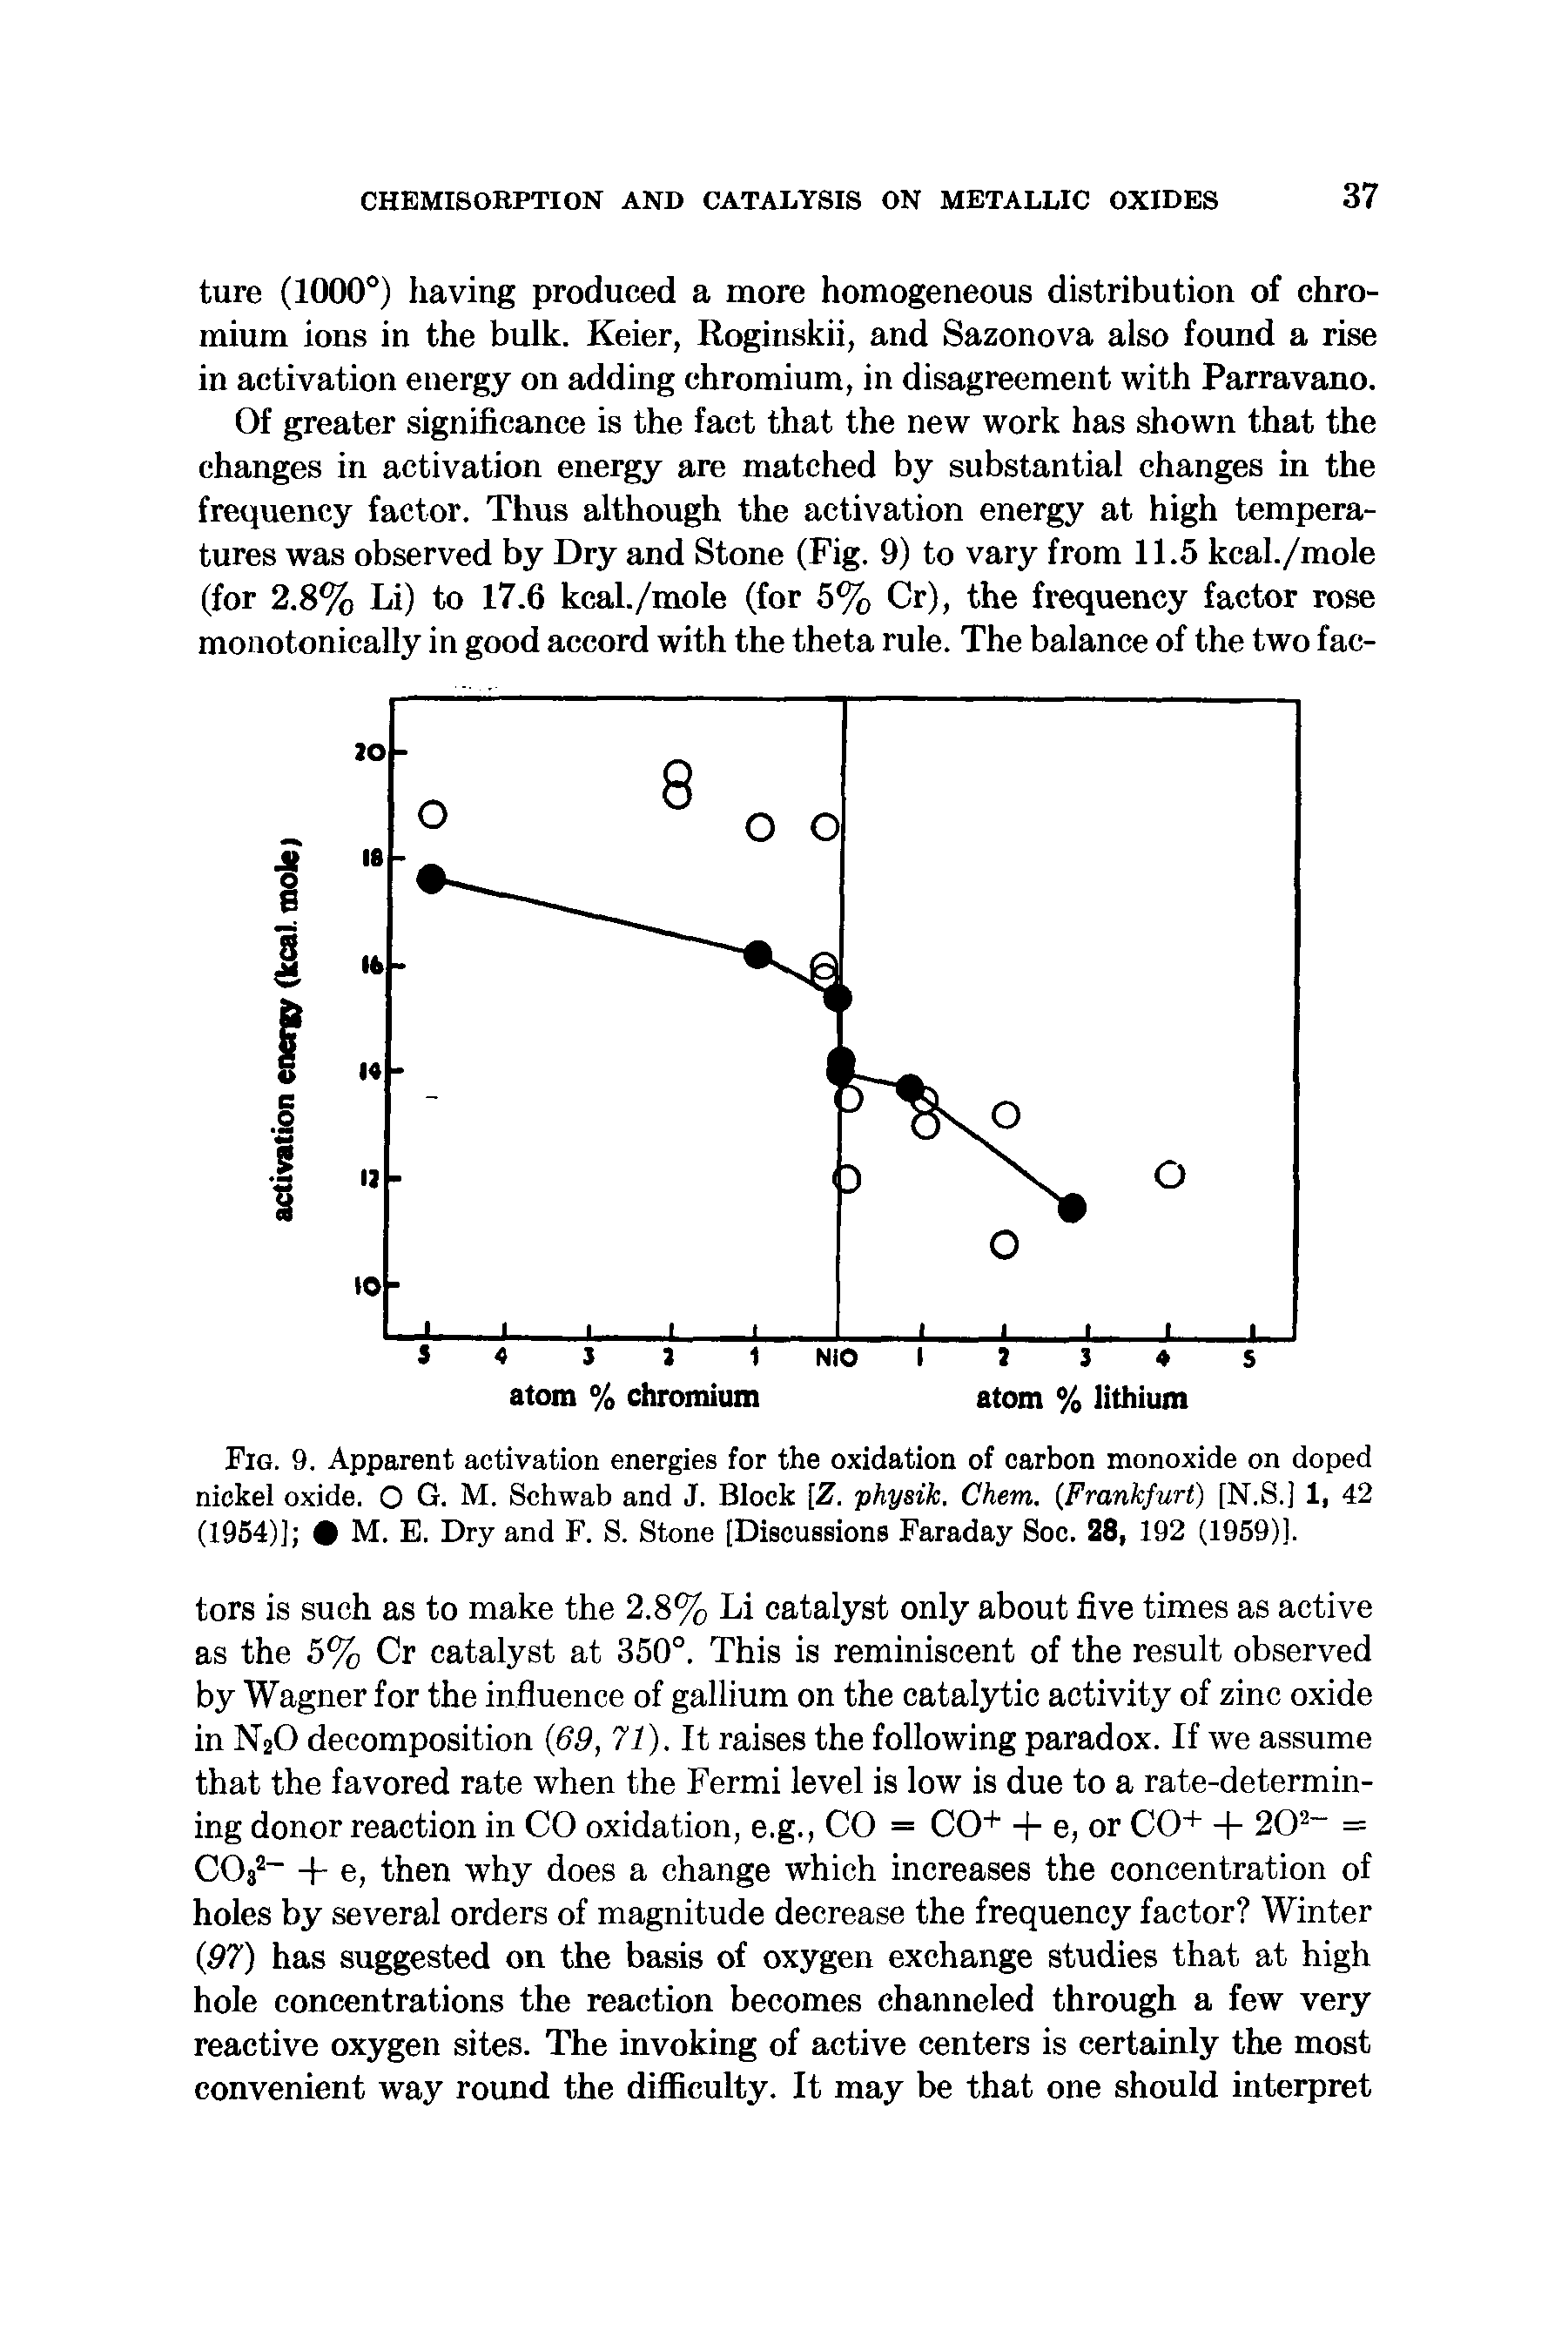 Fig. 9. Apparent activation energies for the oxidation of carbon monoxide on doped nickel oxide. O G. M. Schwab and J. Block [Z. physik. Chem. Frankfurt) [N.S.] 1, 42 (1954)] M. E. Dry and F. S. Stone [Discussions Faraday Soc. 28, 192 (1959)].